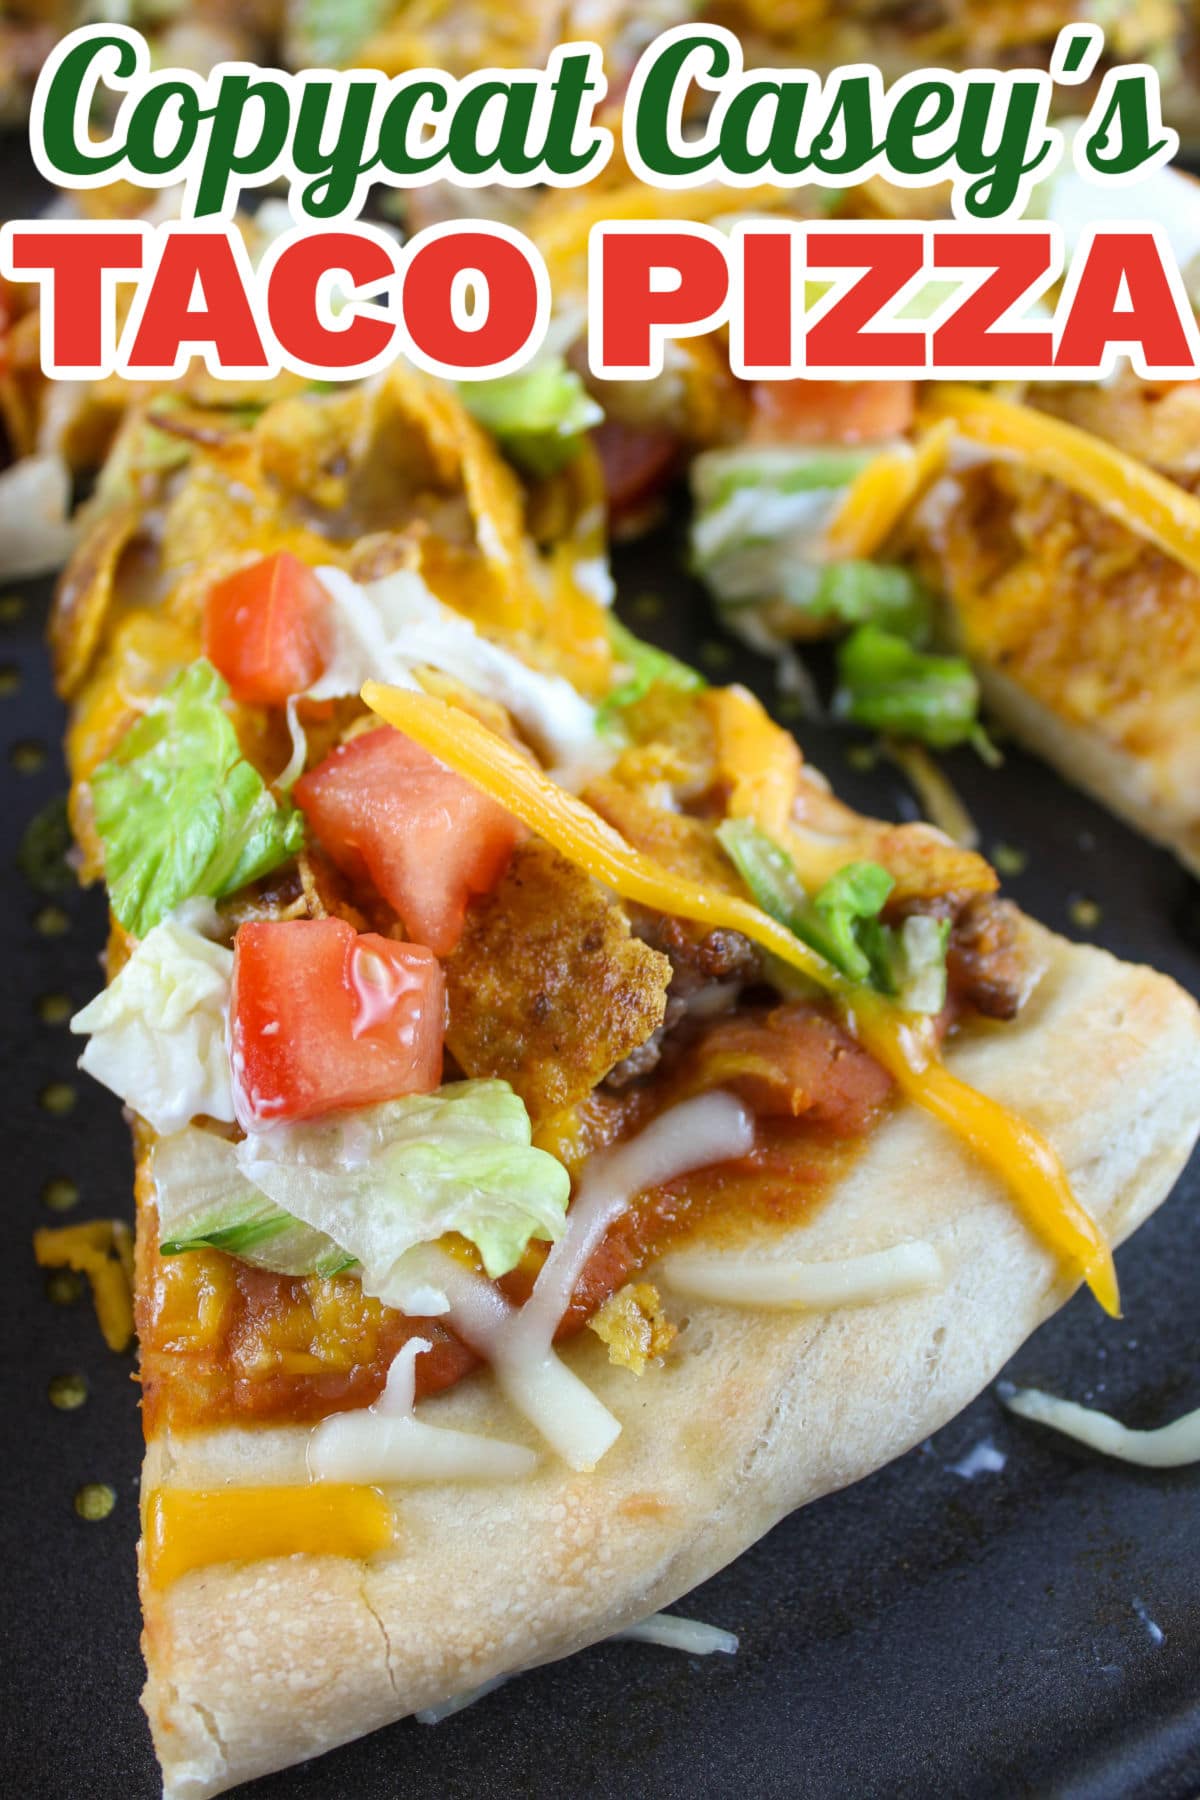 This Copycat Casey's Taco Pizza is the best you'll find! I've got the secret to the pizza "sauce" they use for this tasty treat! Mix up your Taco Tuesday by making the best darned taco pizza loaded with refried beans, salsa, ground beef, cheese, taco chips, lettuce, tomatoes and sour cream! via @foodhussy